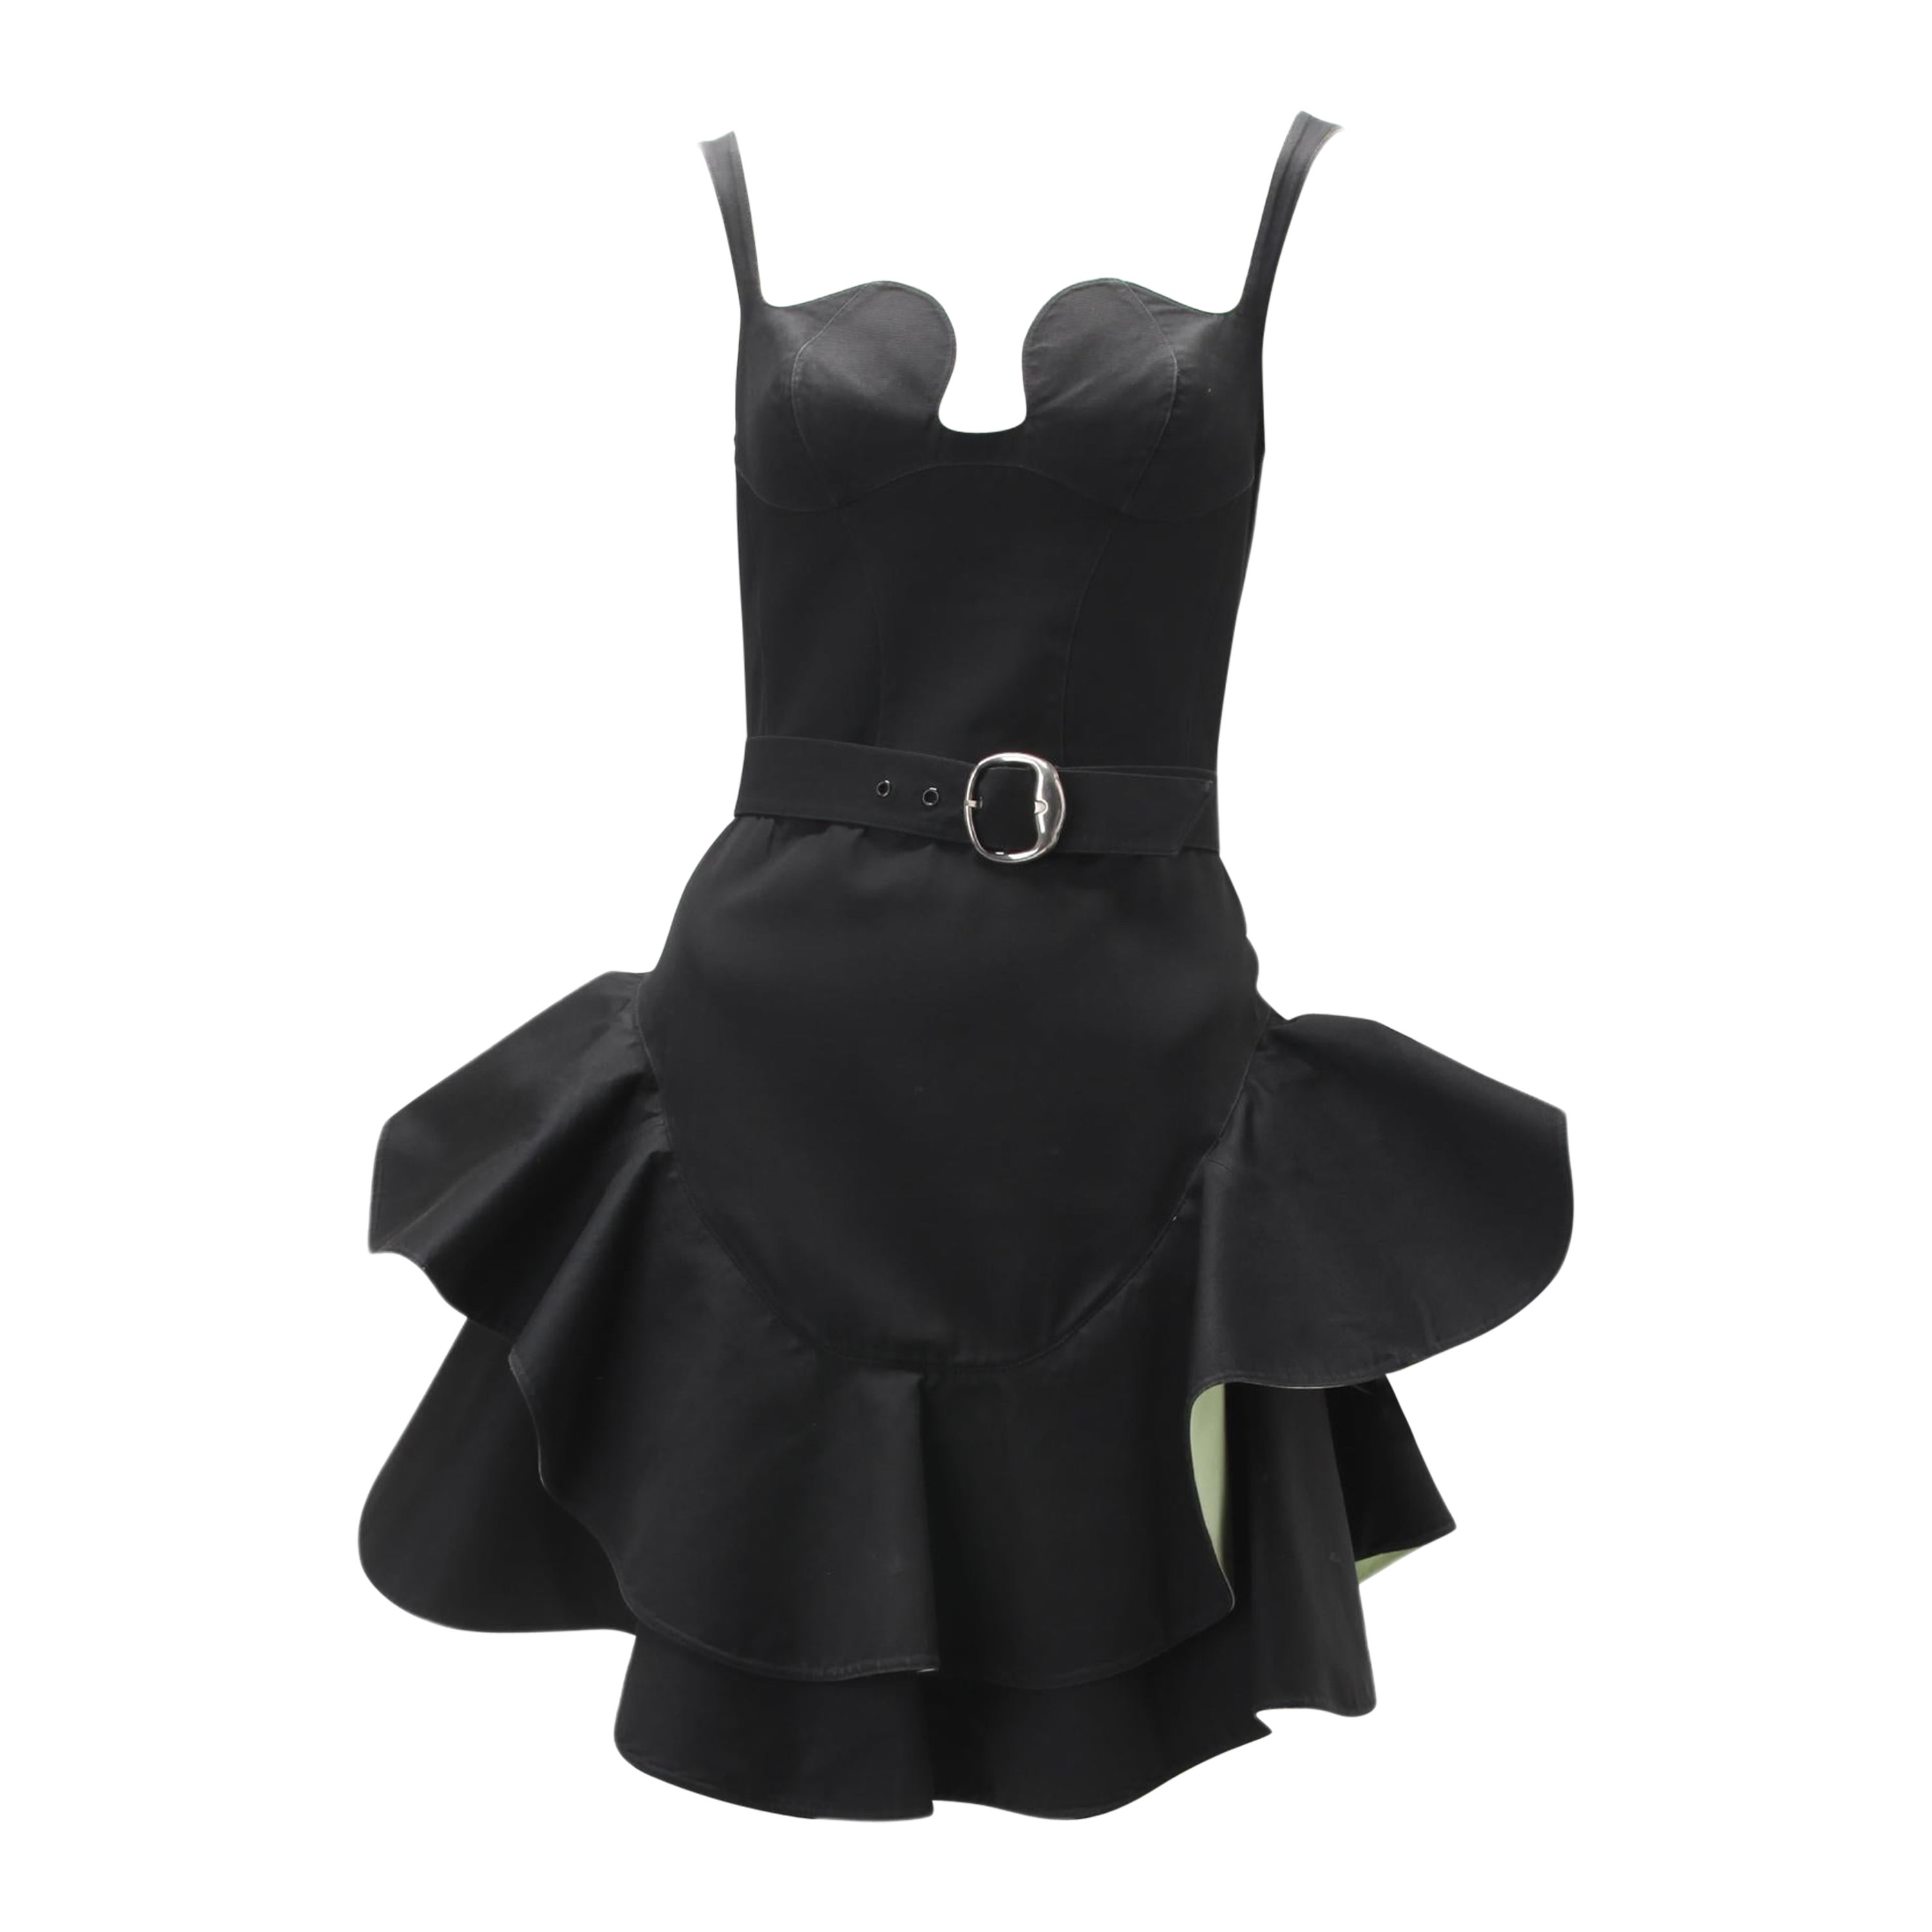 S/S 1990 Thierry Mugler Black and Green Sculptural Dress  For Sale